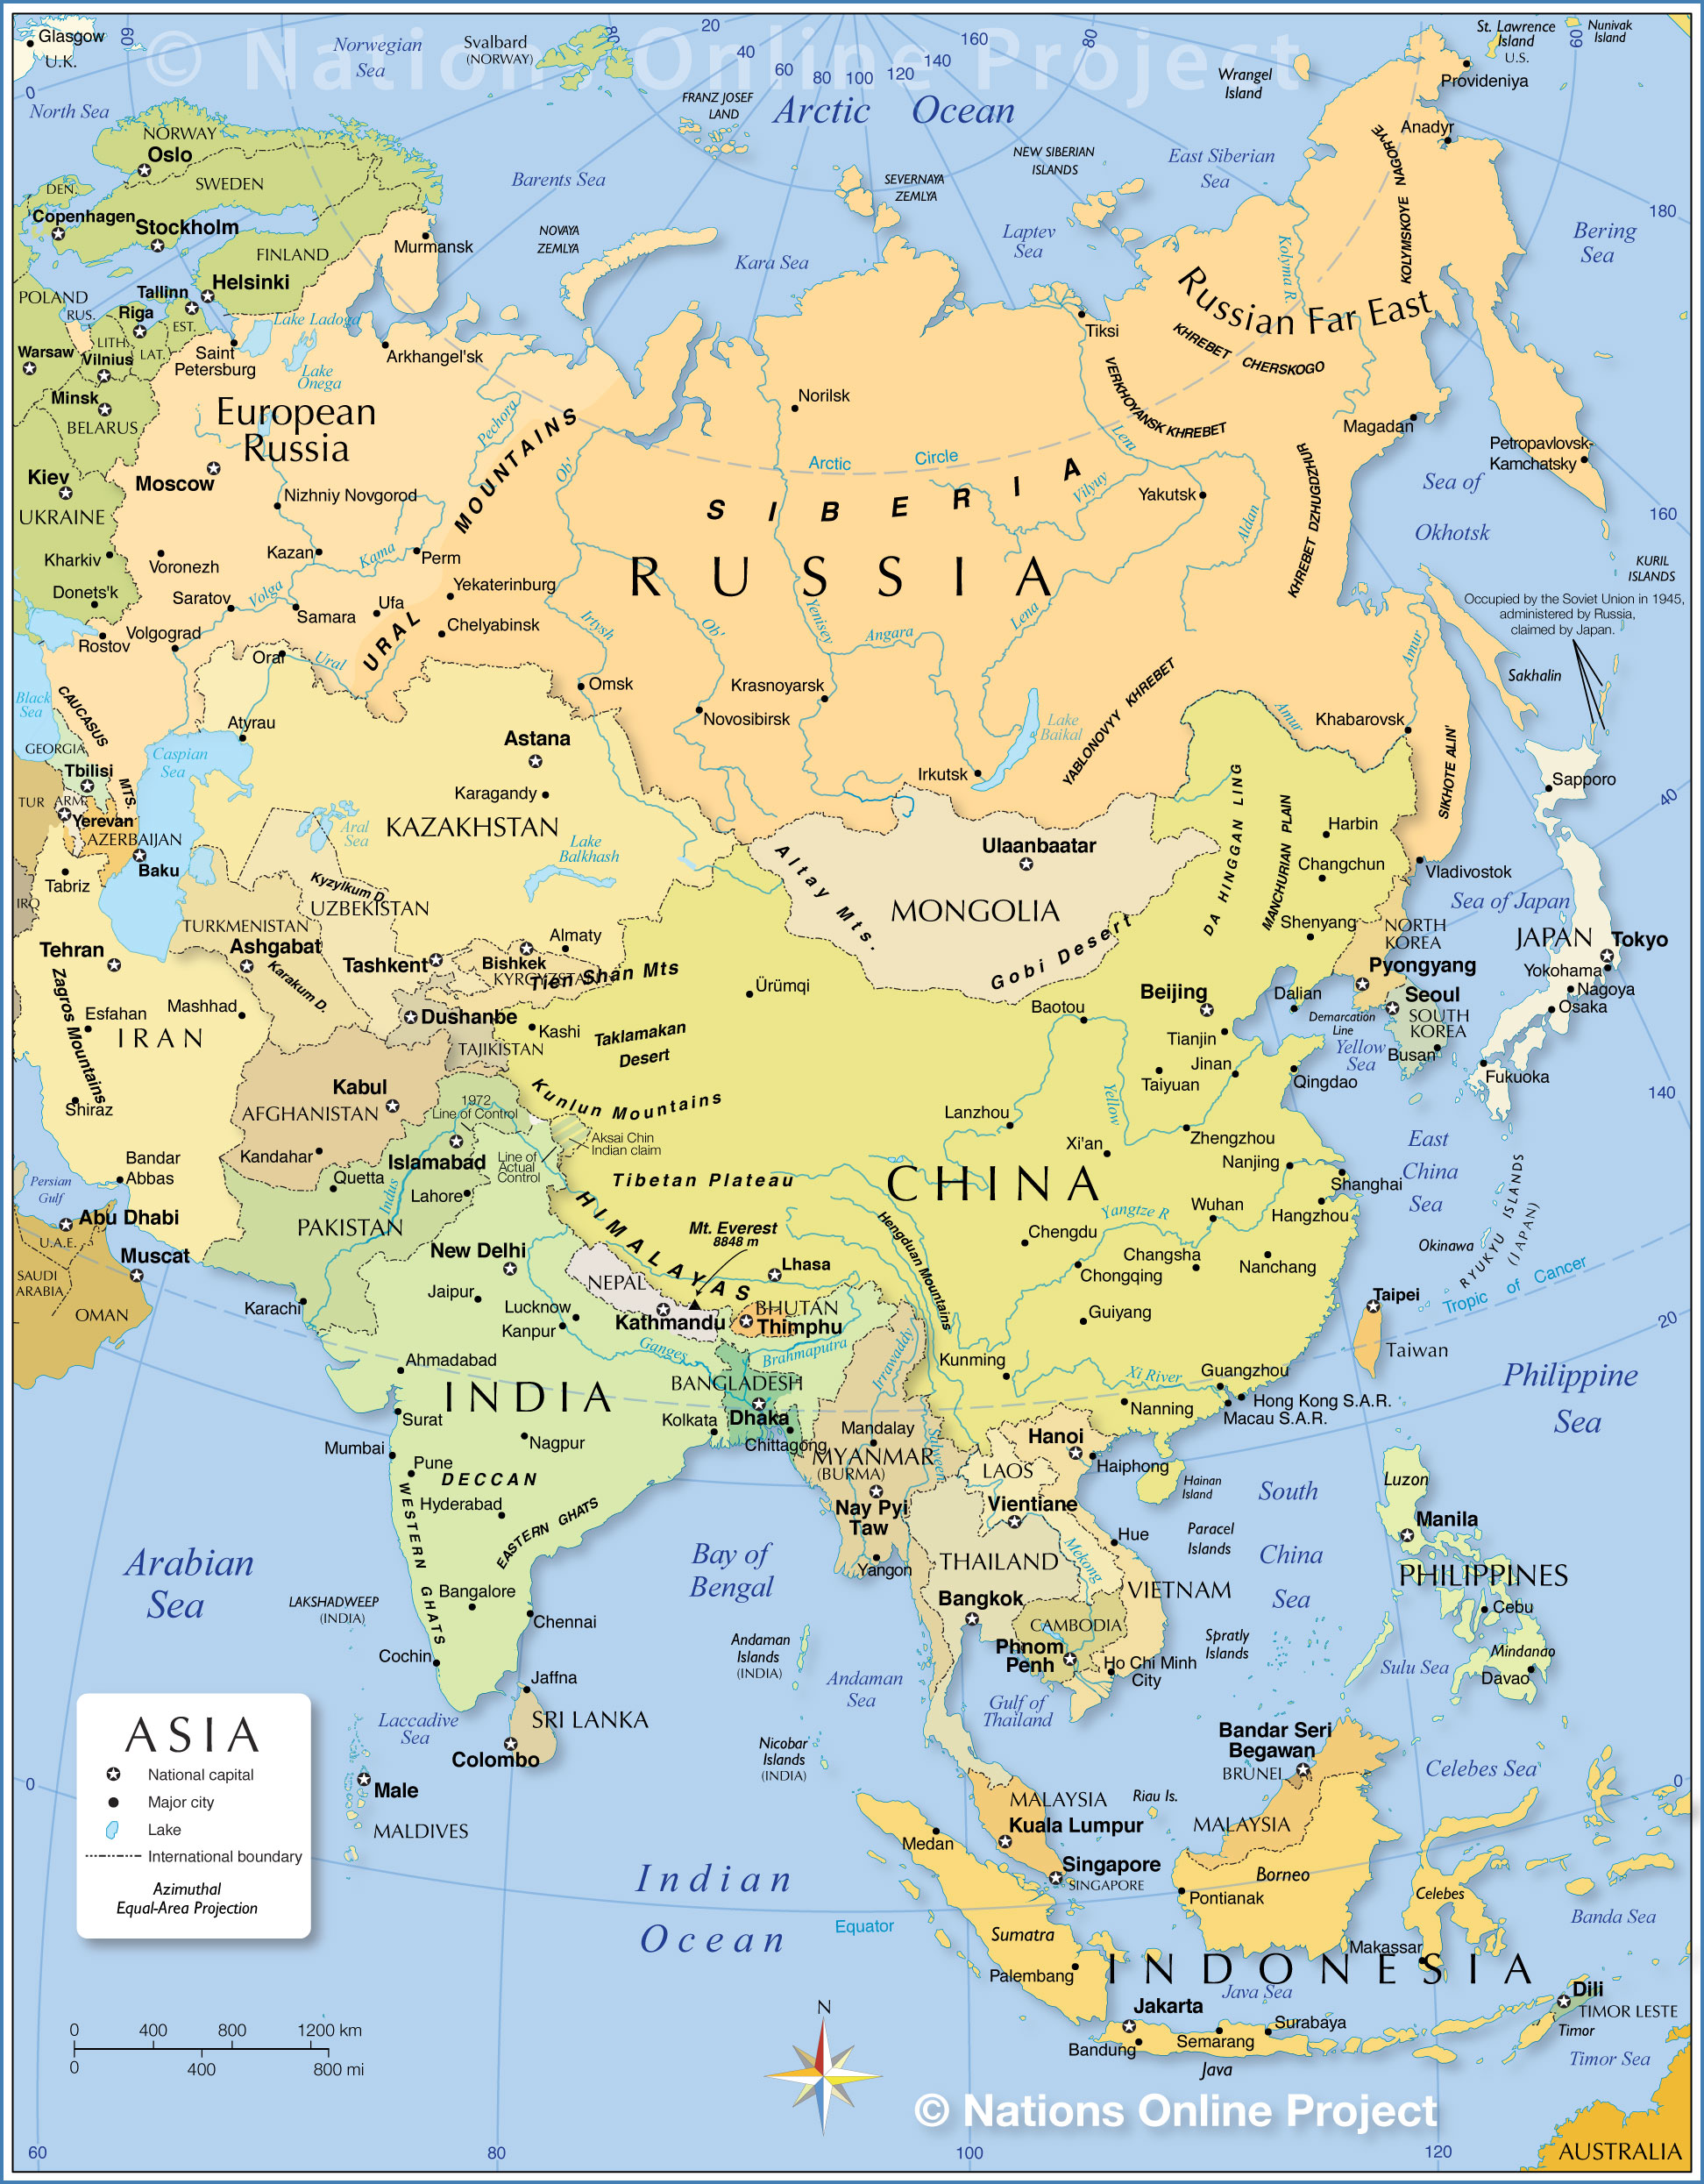 Map of Asia, Northern Asia,  Central Asia, South Asia, East Asia, and Southeast Asia